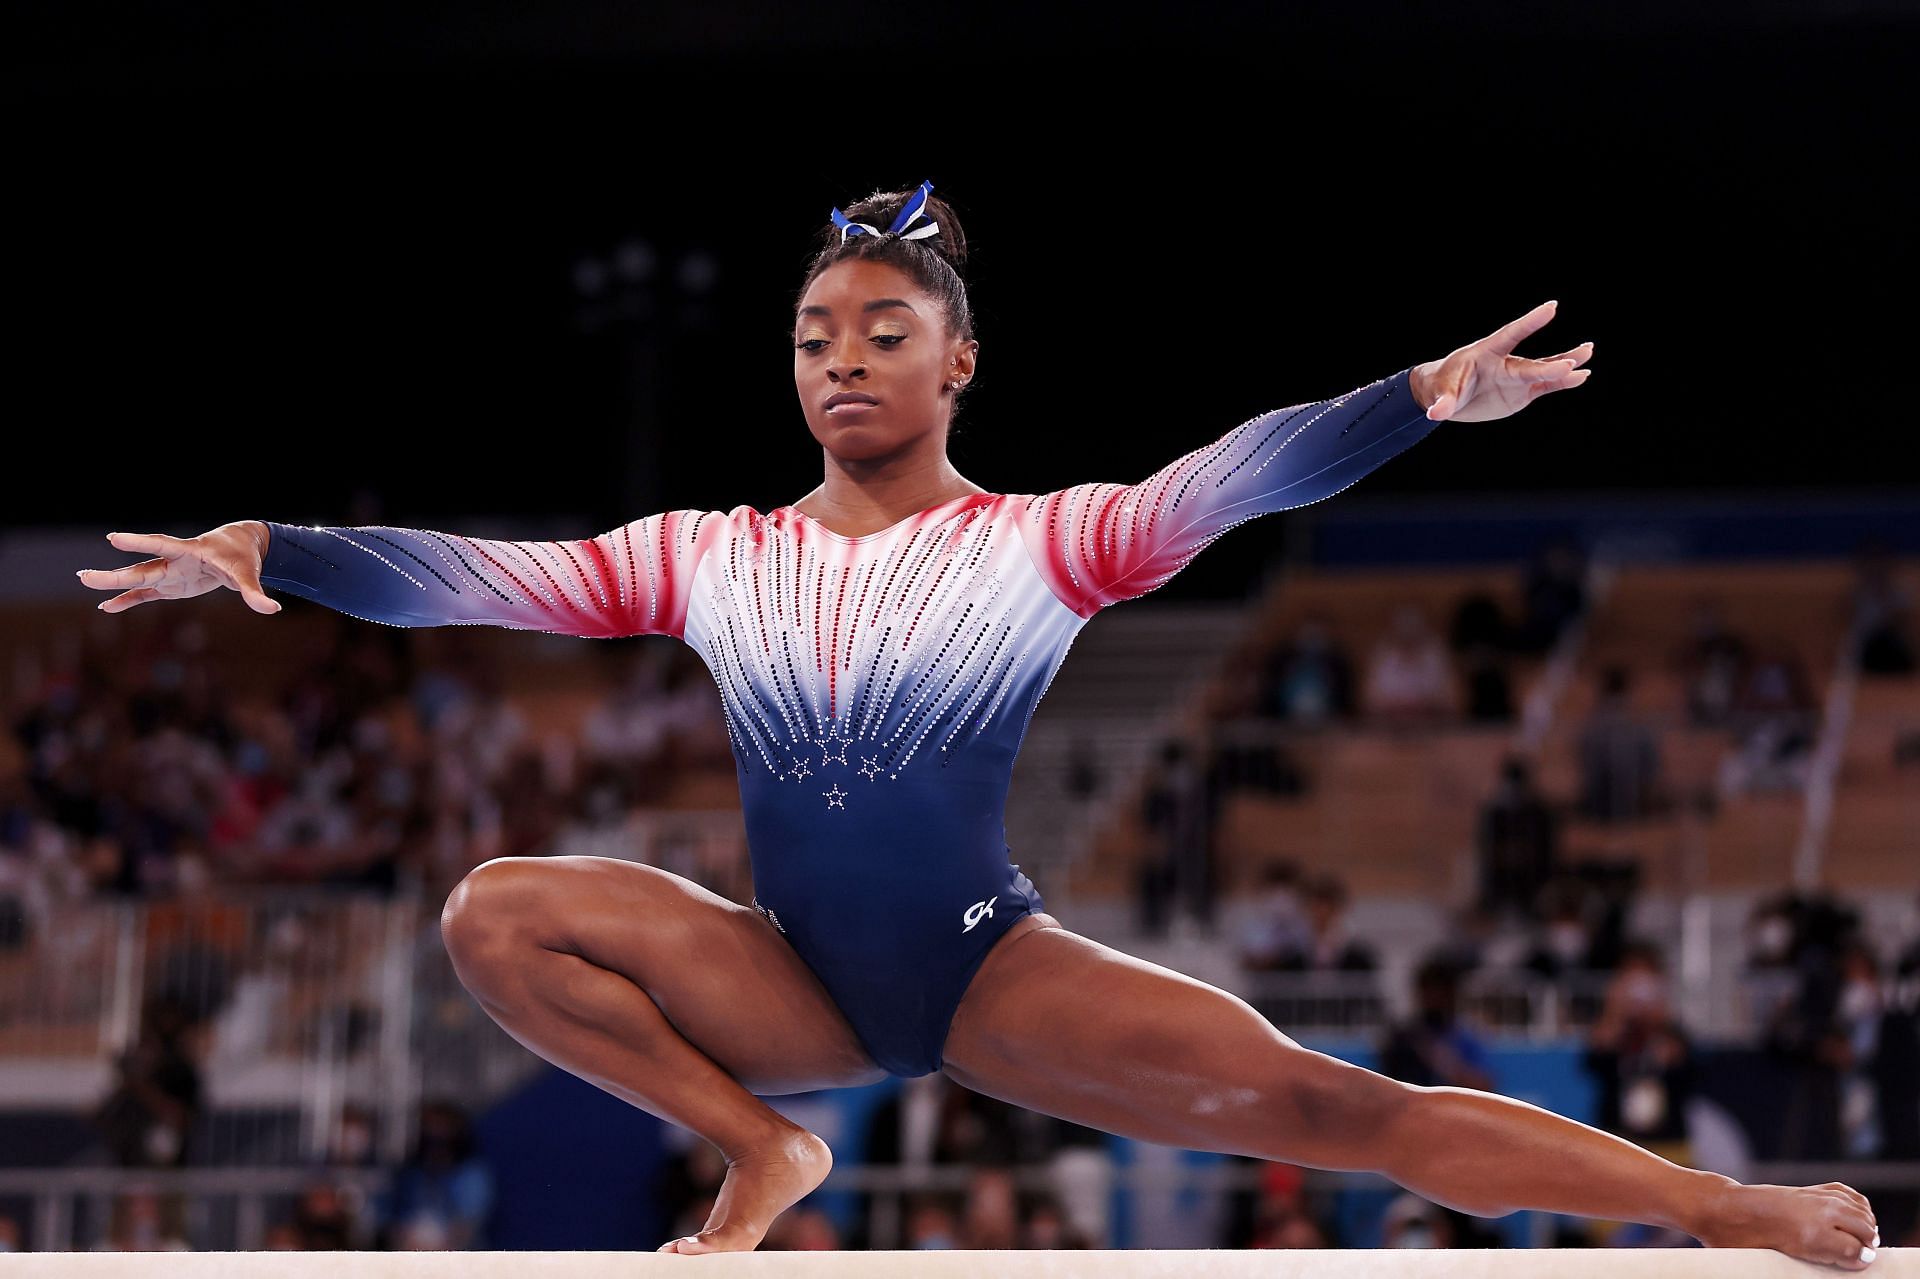 Arguably the world's best gymnast, Biles came in to better her already...